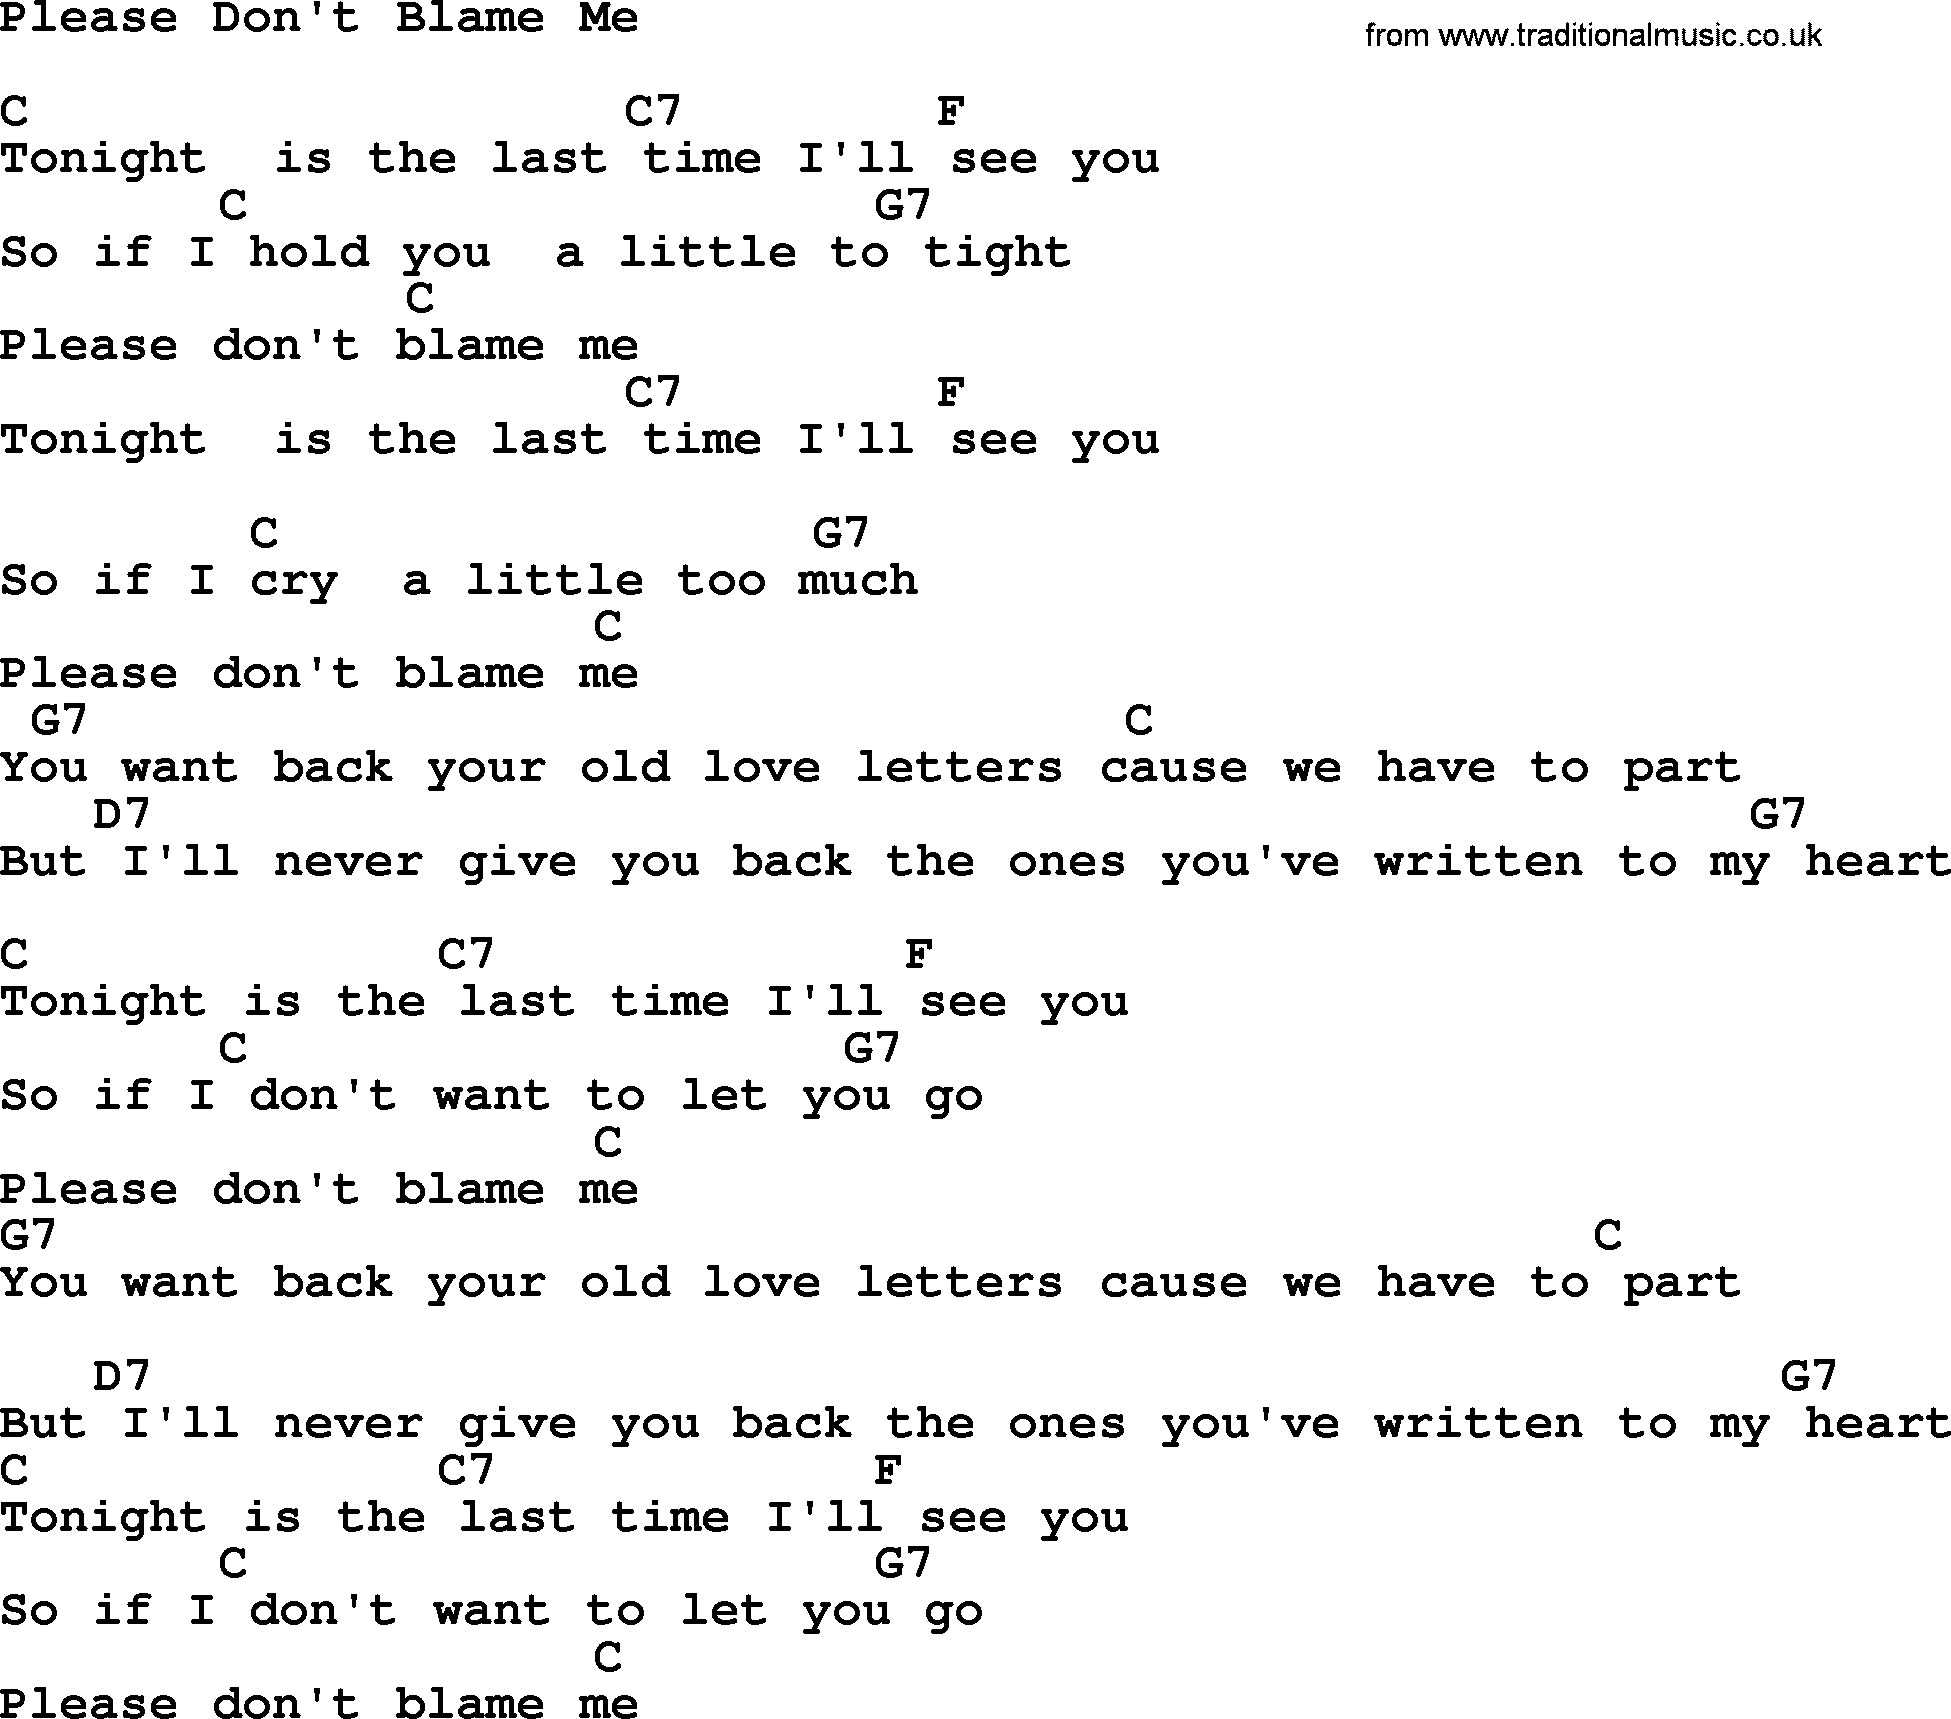 Marty Robbins song: Please Don't Blame Me, lyrics and chords